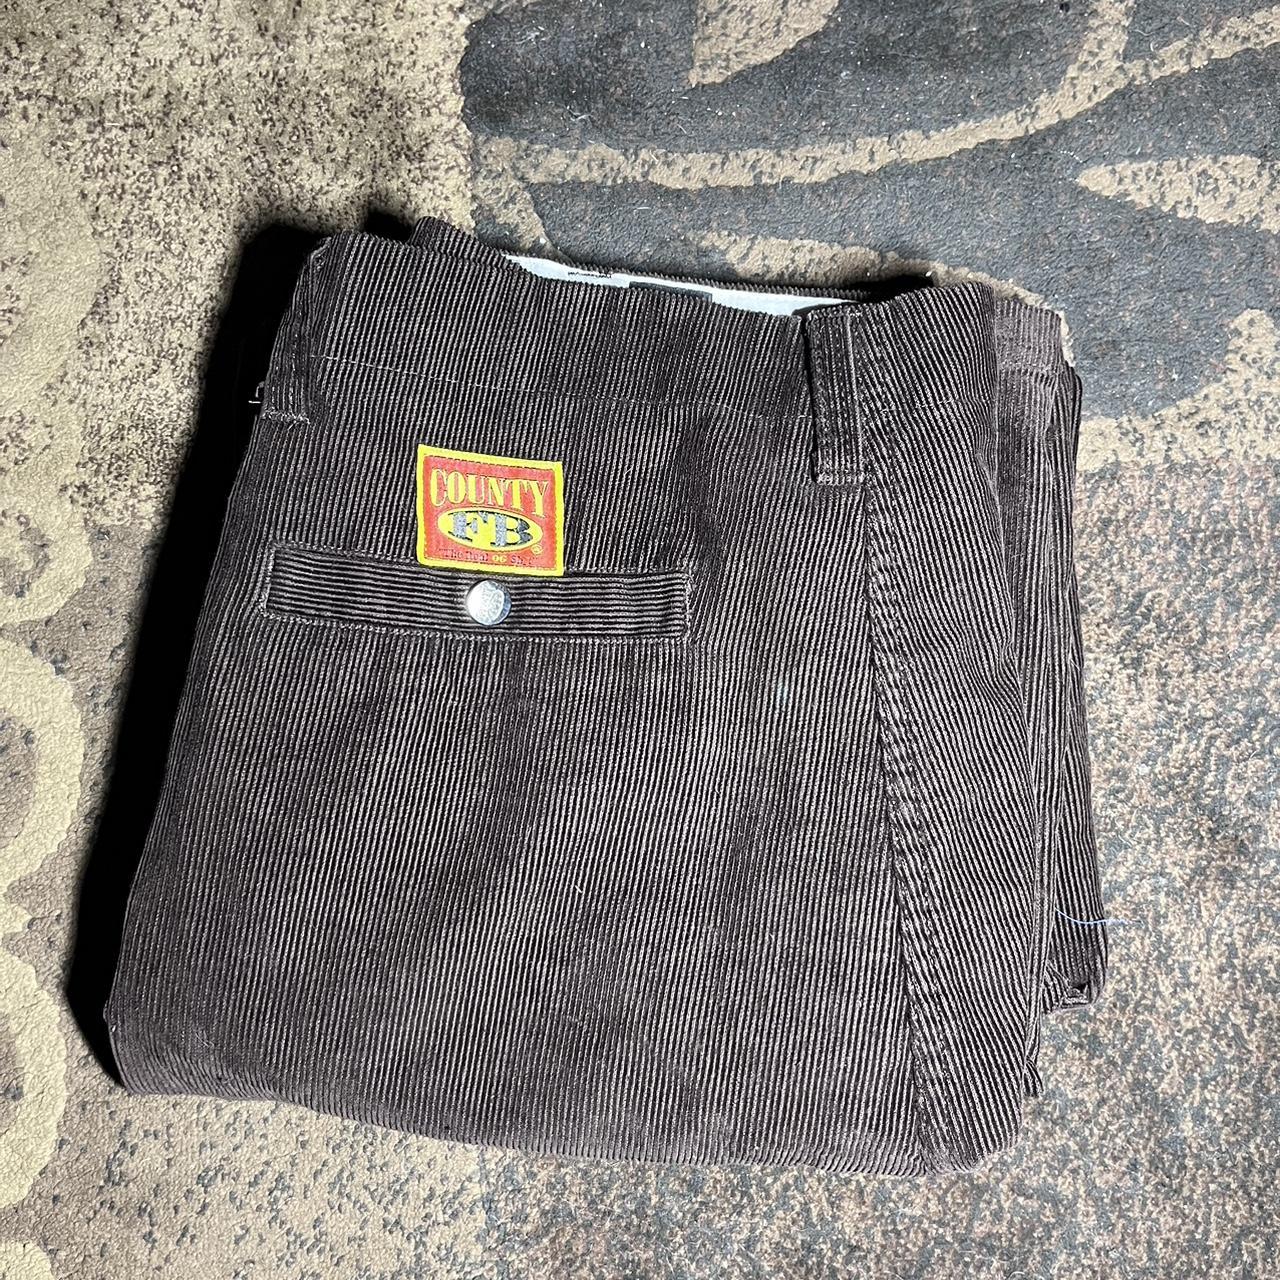 Men’s fb county courdory brown jeans really nice... - Depop